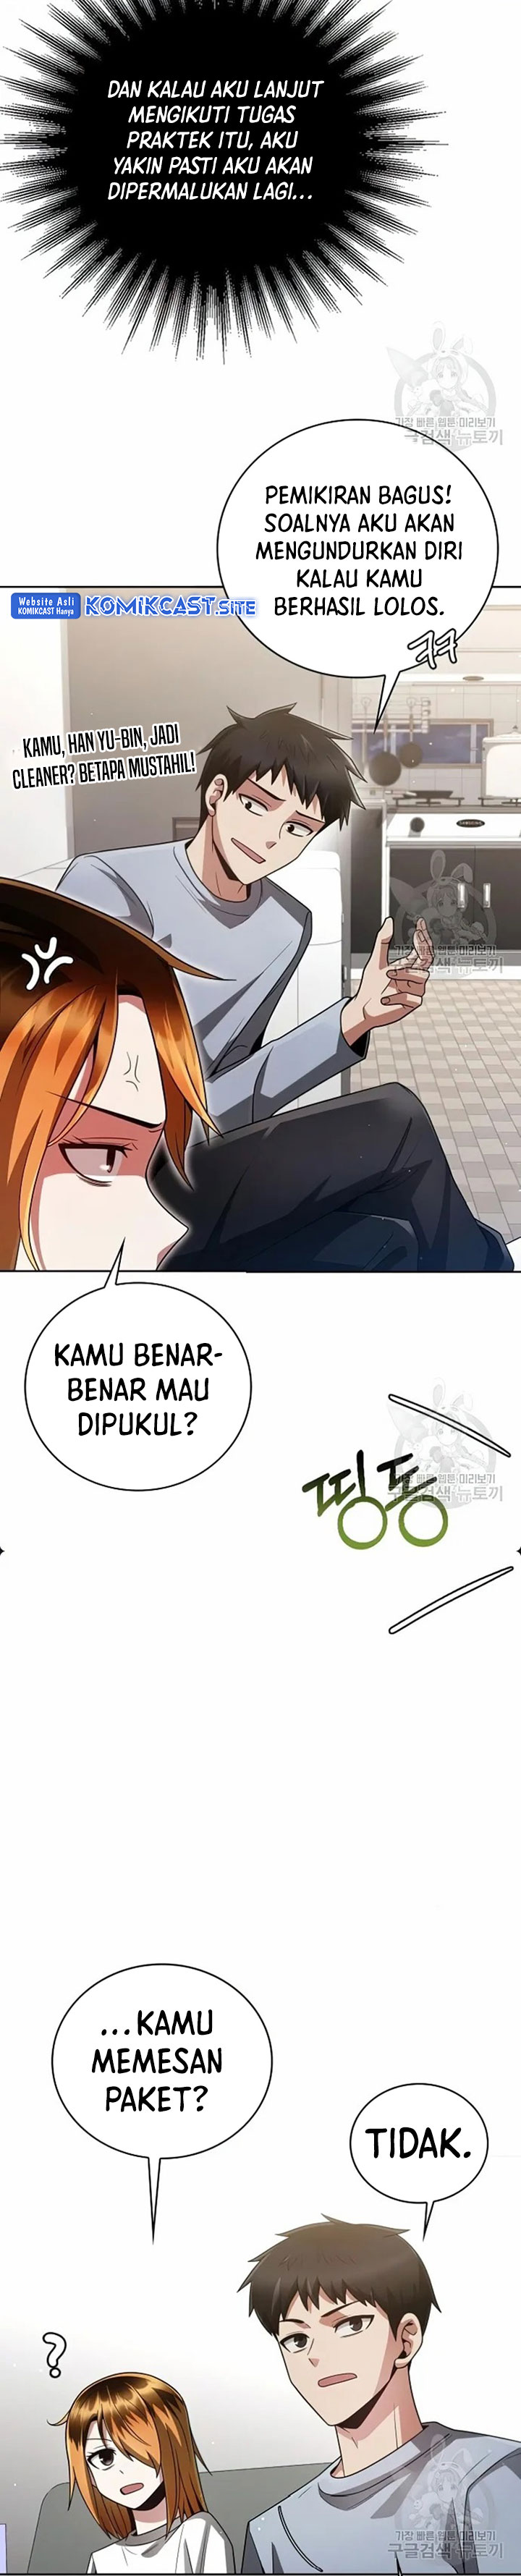 Dilarang COPAS - situs resmi www.mangacanblog.com - Komik clever cleaning life of the returned genius hunter 029 - chapter 29 30 Indonesia clever cleaning life of the returned genius hunter 029 - chapter 29 Terbaru 27|Baca Manga Komik Indonesia|Mangacan